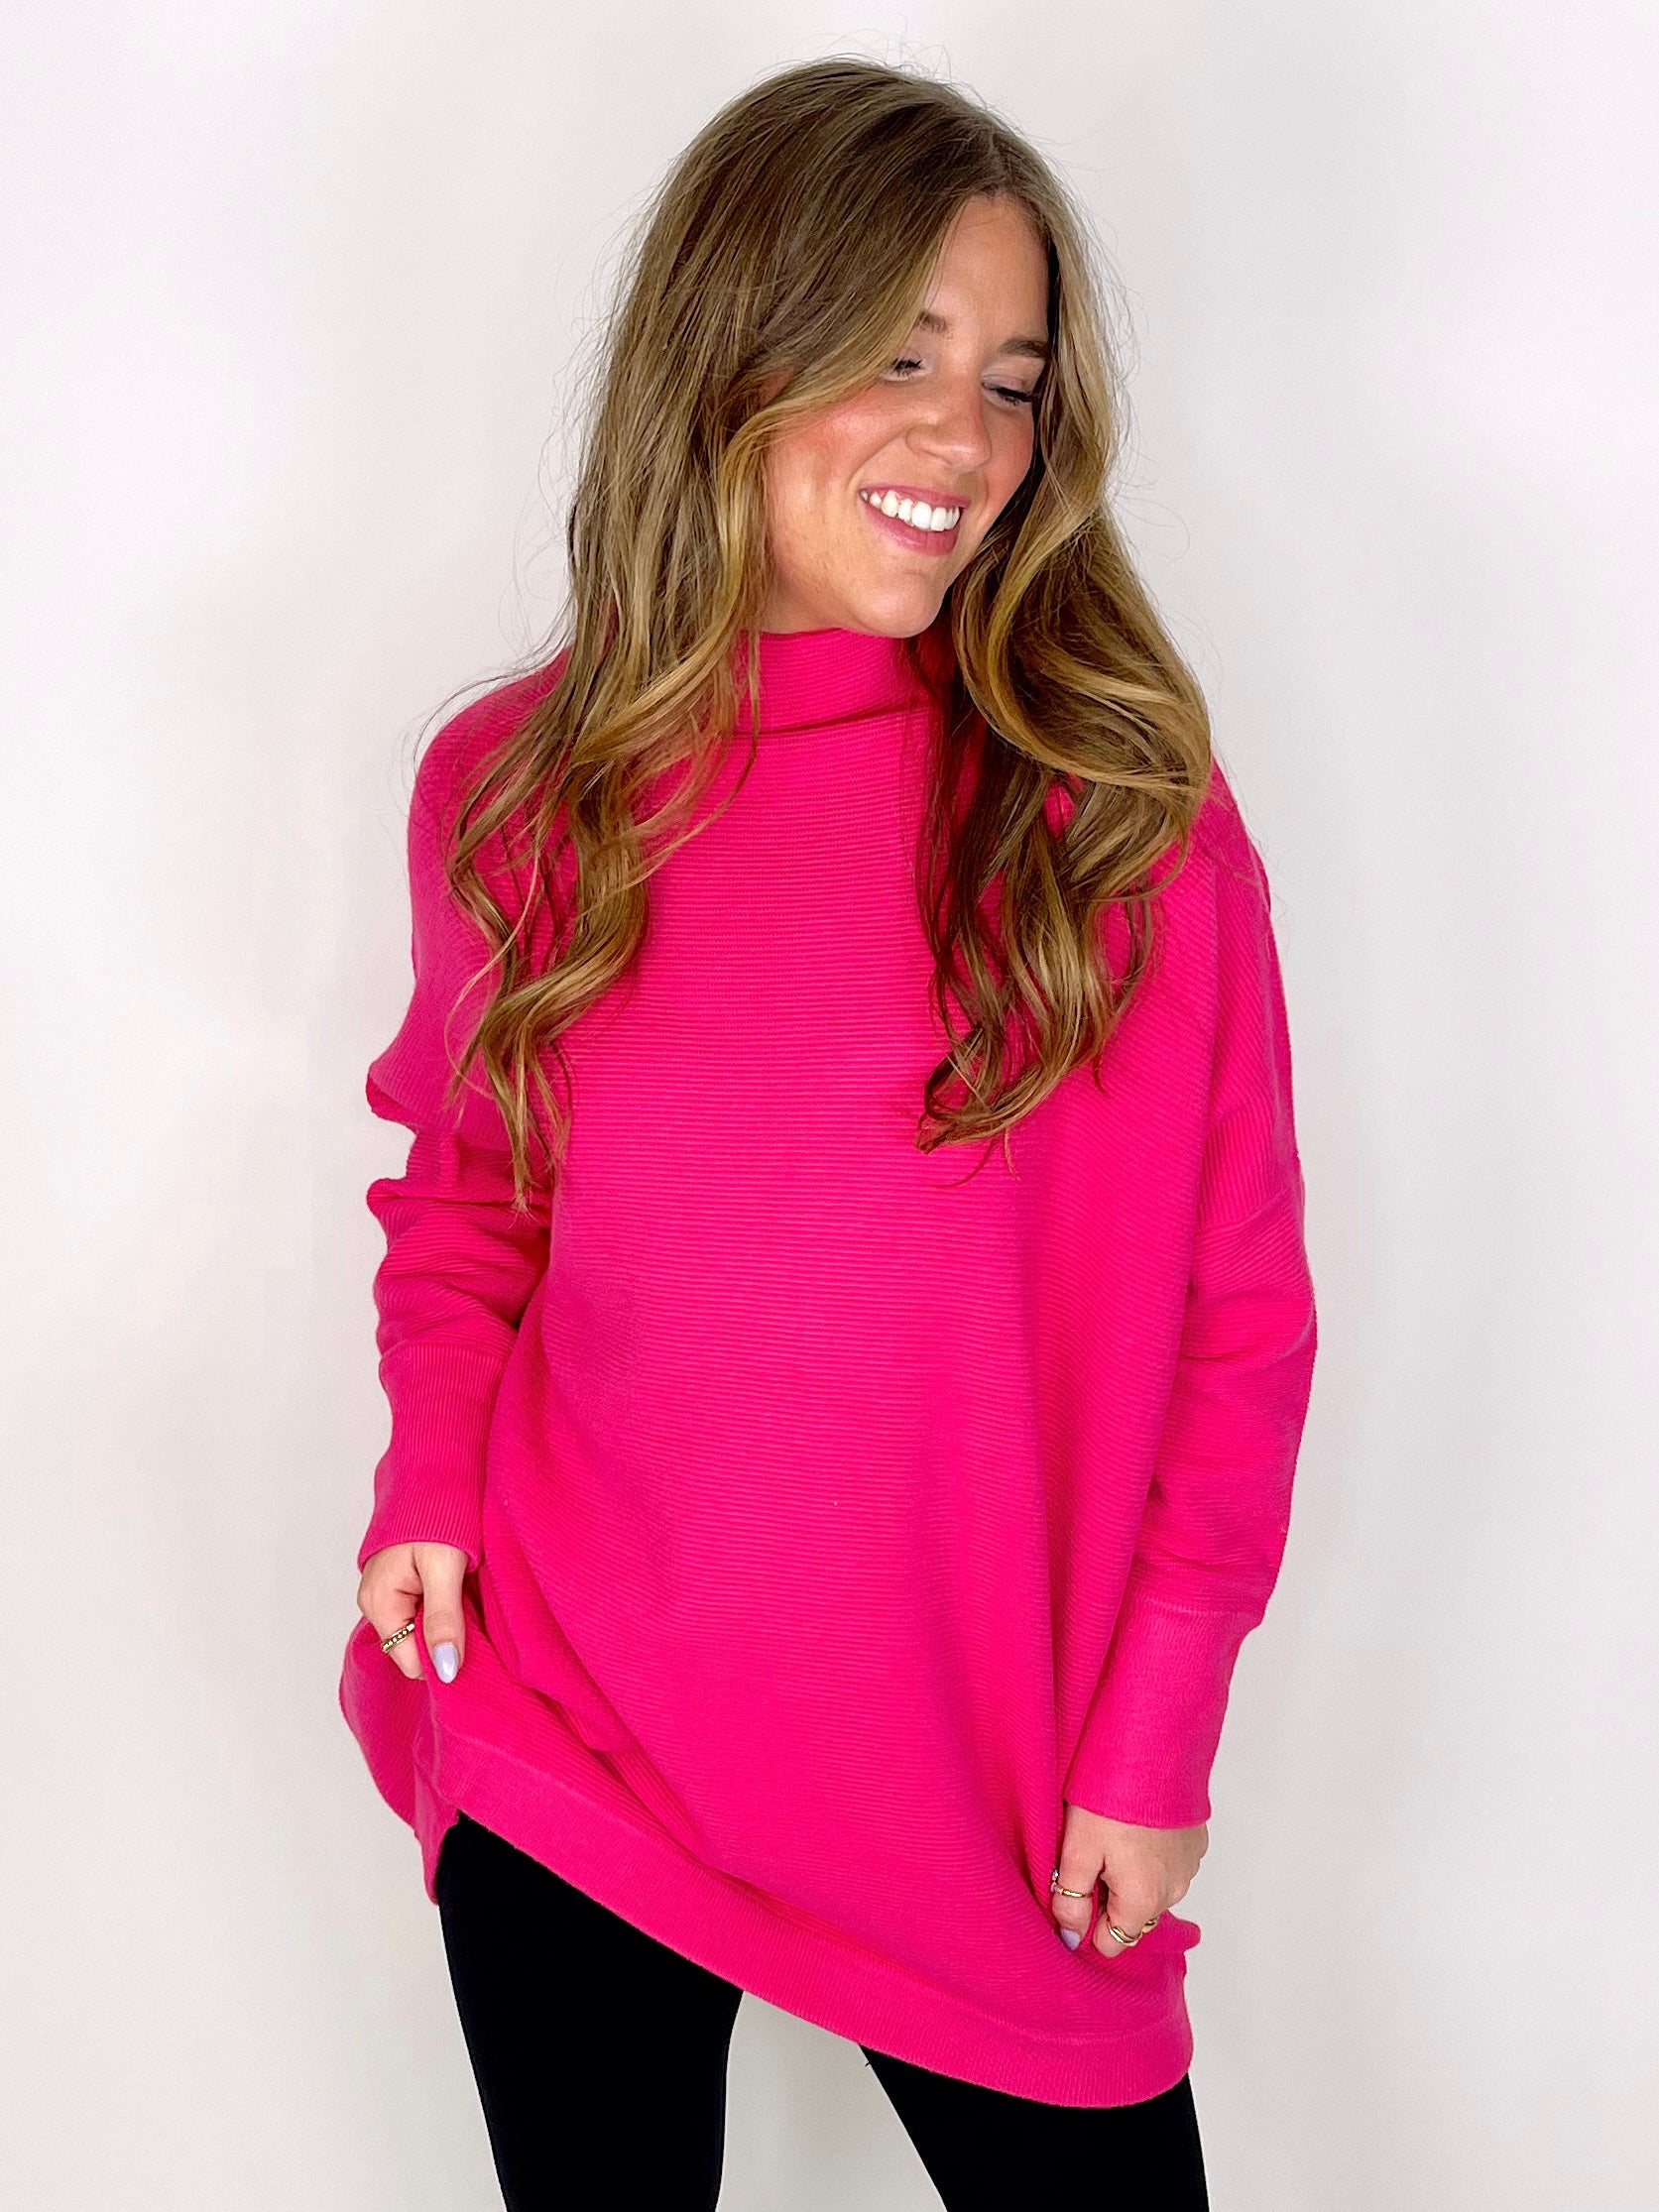 The Anne Sweater-Sweaters-Anniewear-The Village Shoppe, Women’s Fashion Boutique, Shop Online and In Store - Located in Muscle Shoals, AL.